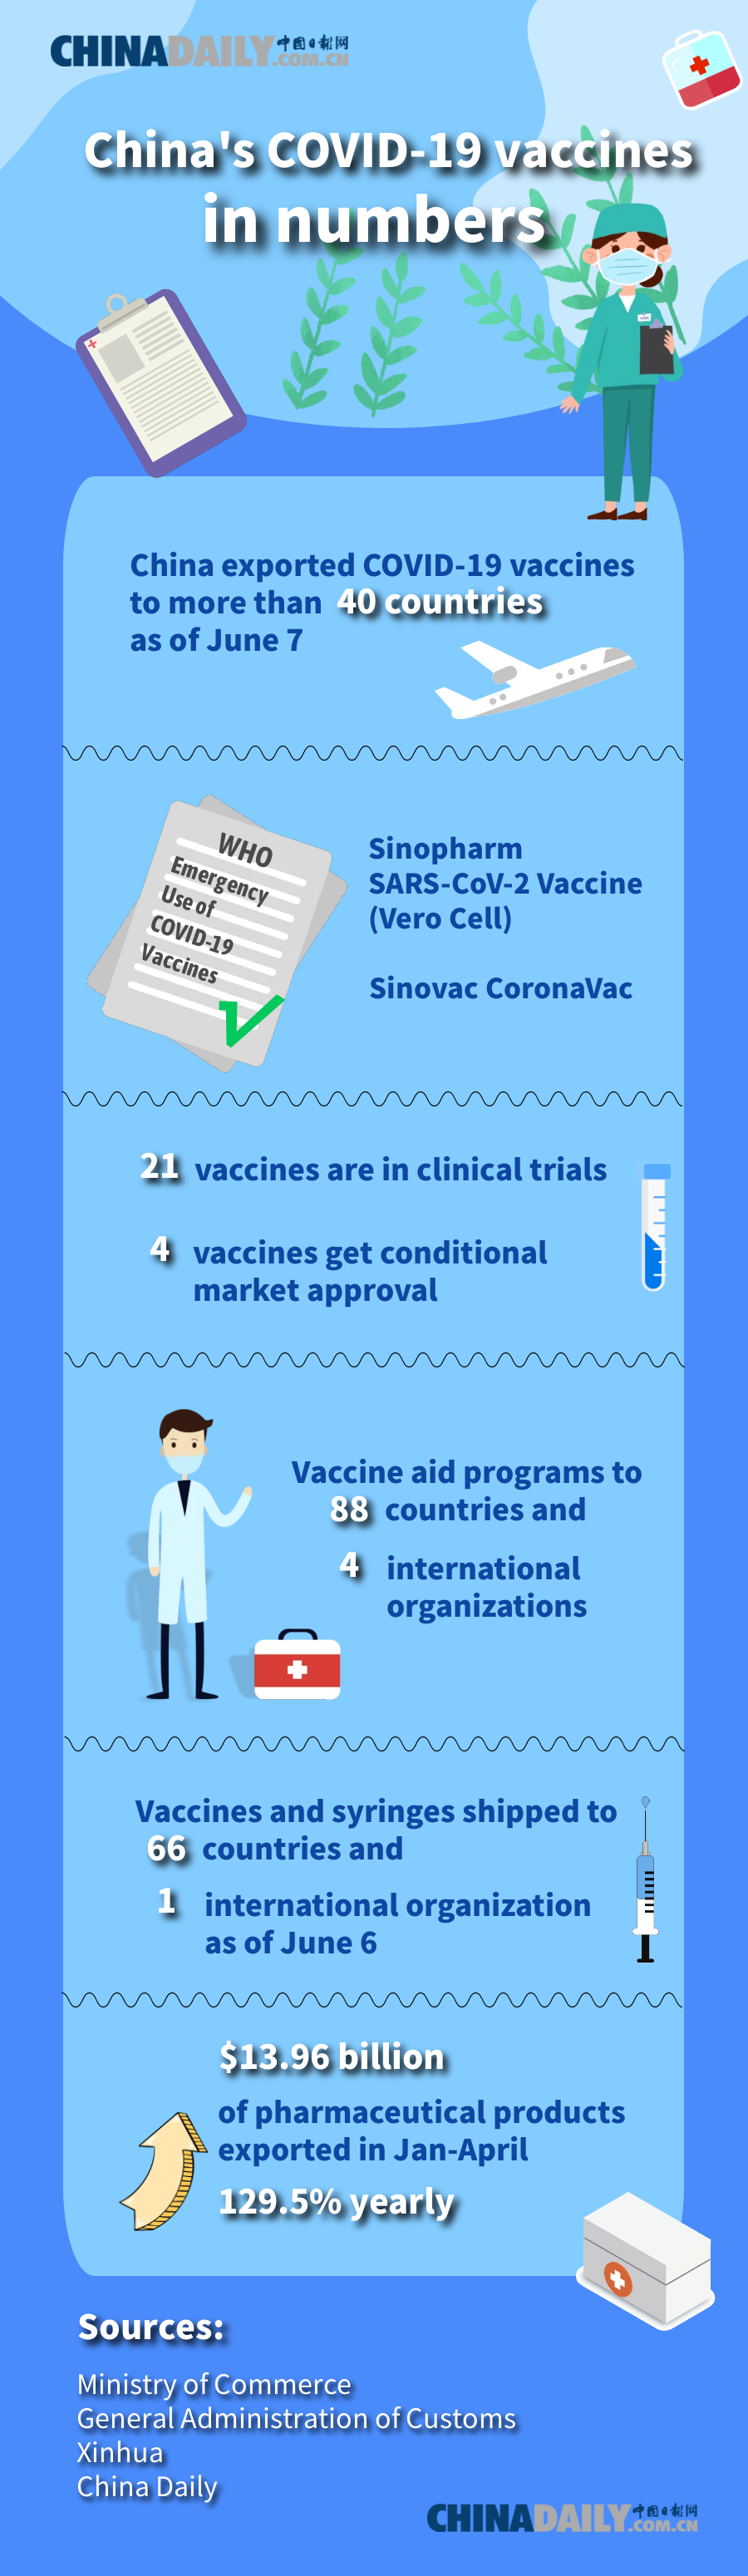 China's COVID-19 vaccines in numbers.png